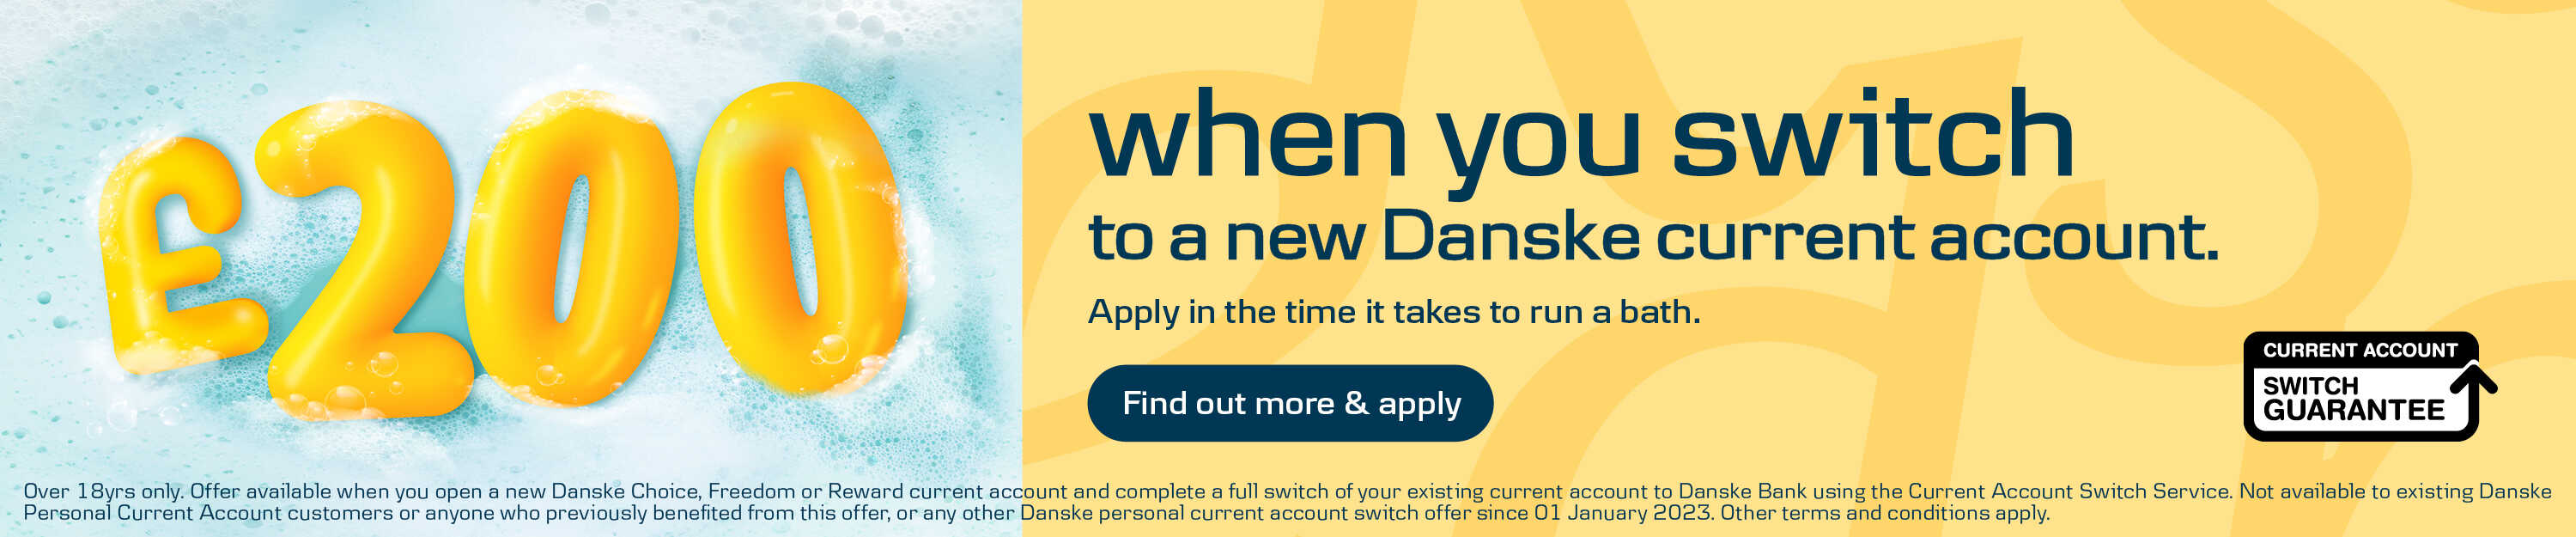 Get £200 when you switch to a new Danske current account. Over 18yrs only. Offer available when you open a new Danske Choice, Freedom or Reward current account and complete a full switch of your existing current account to Danske Bank using the Current Account Switch Service. Not available to existing Danske Personal Current Account customers or anyone who previously benefited from this offer, or any other Danske personal current account switch offer since 01 January 2023. Other terms and conditions apply.